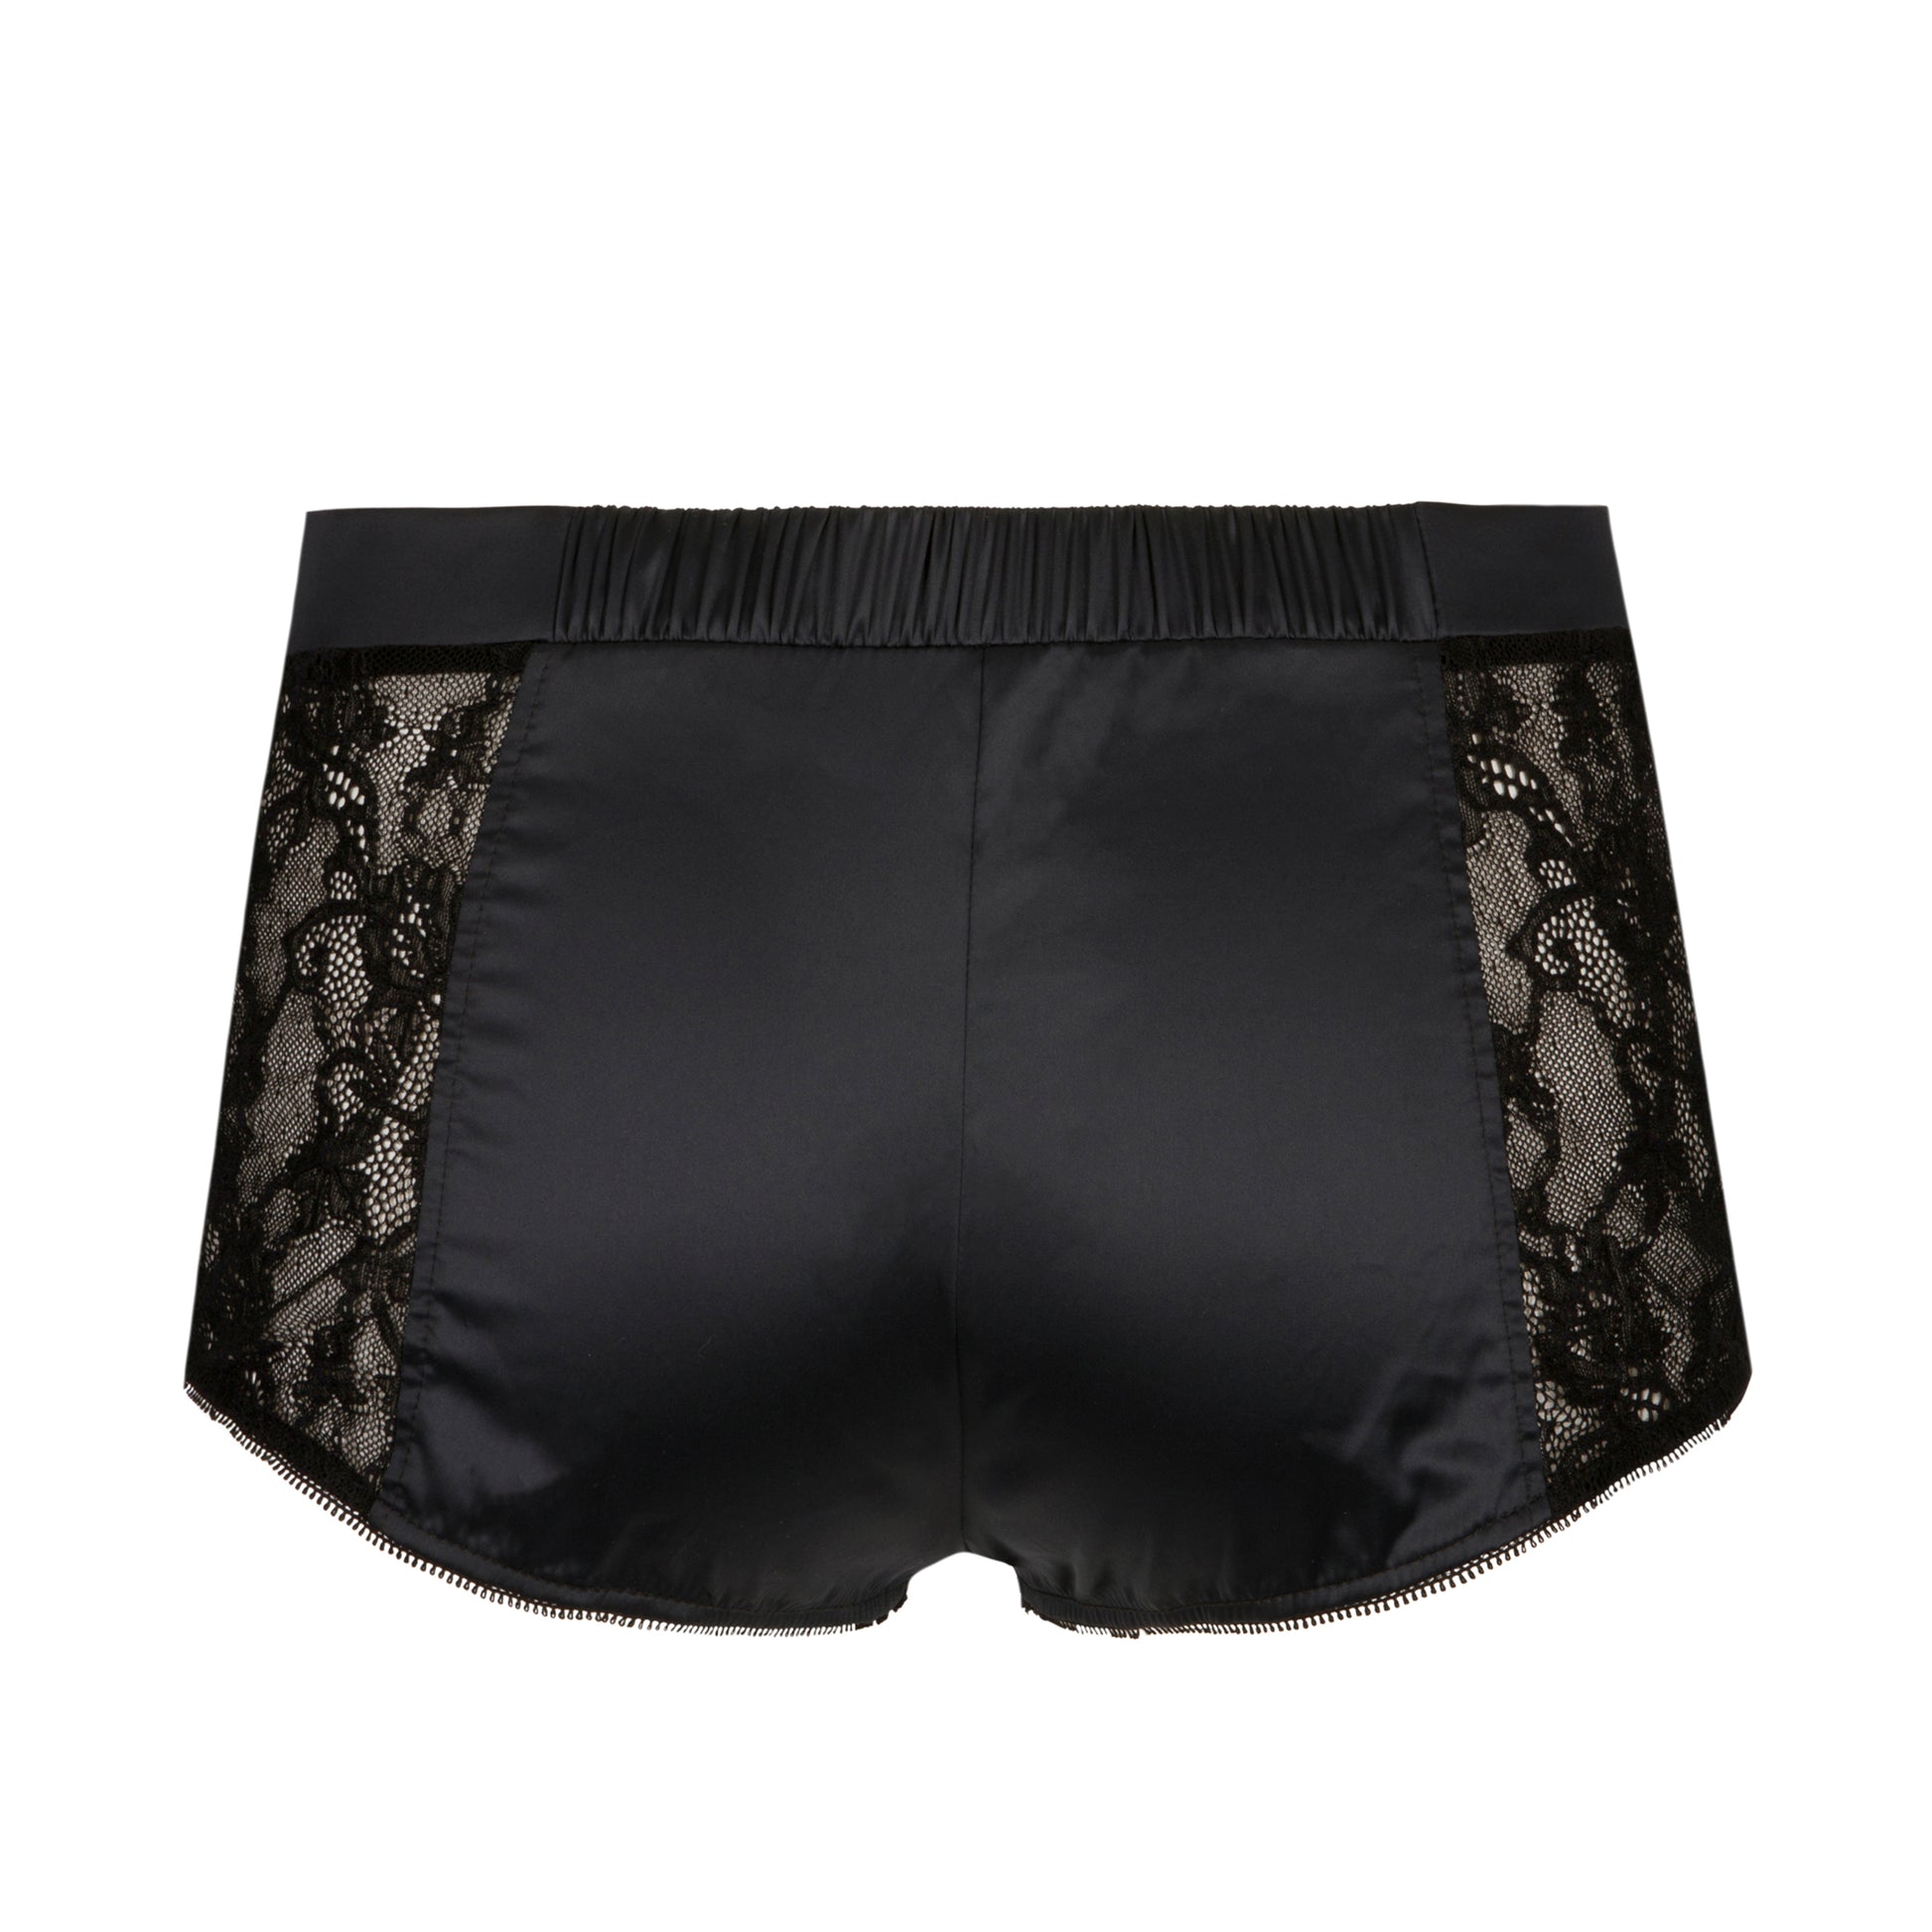 Shorty - Stay new collection - Maud et Marjorie Lingerie